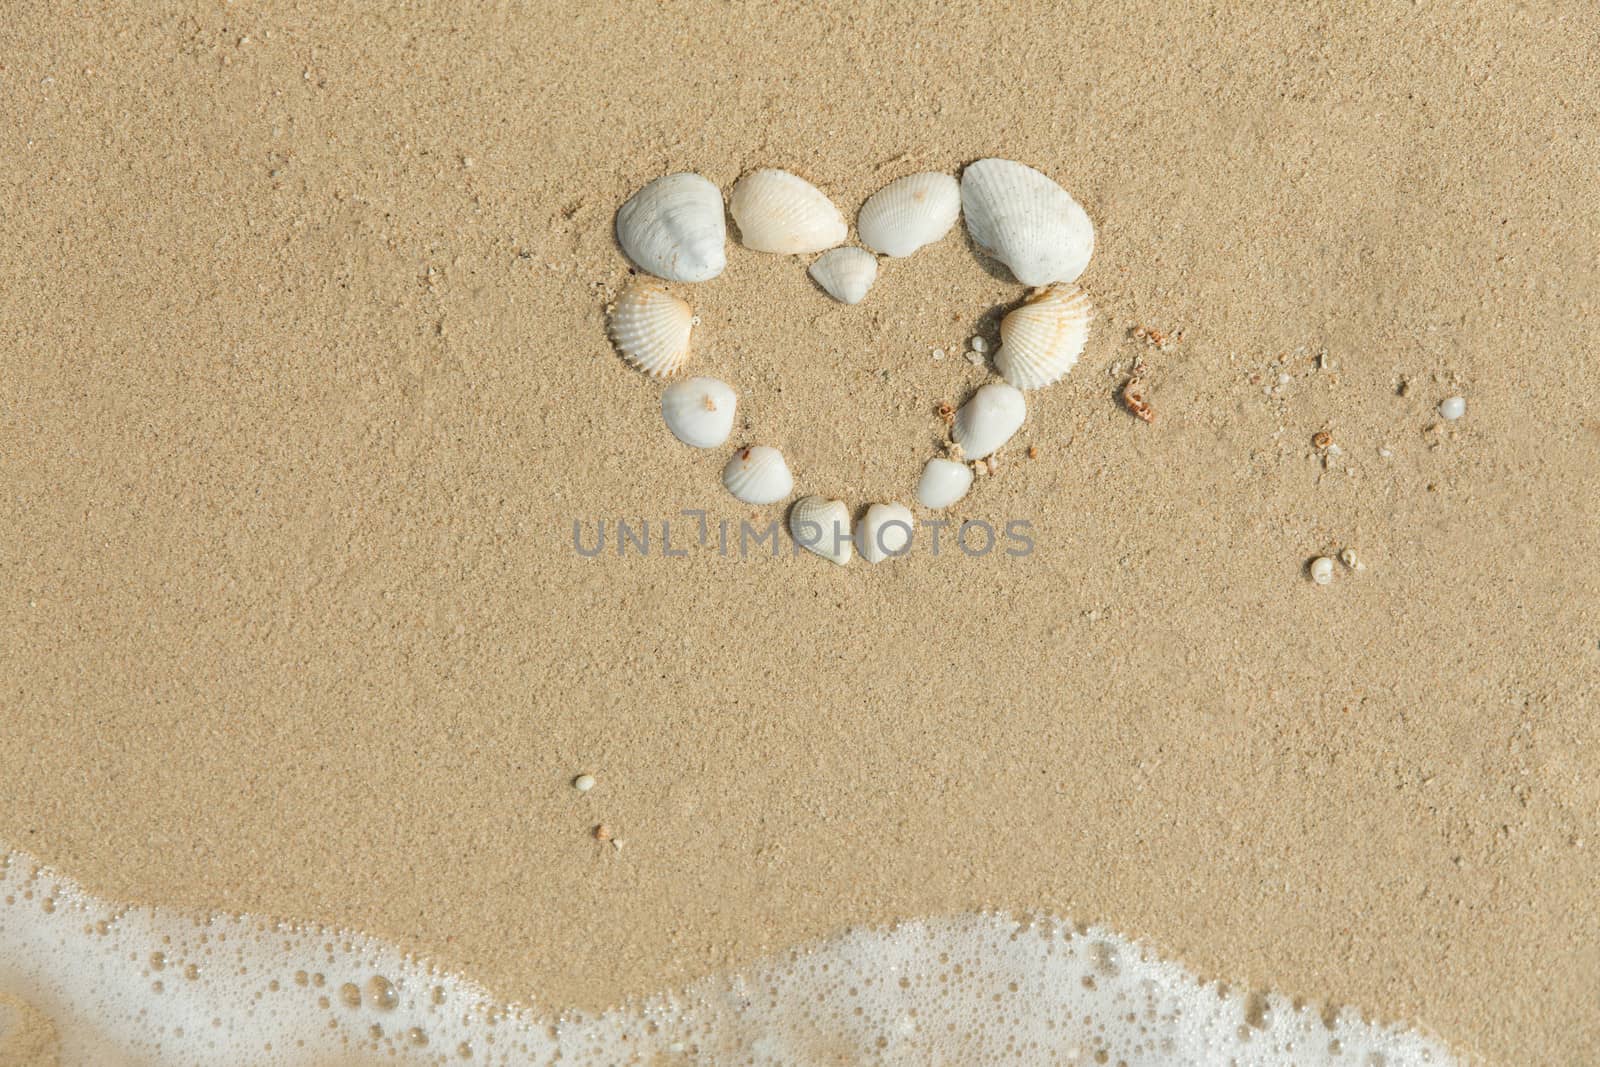 Sea shells forming heart, Valentines day theme 